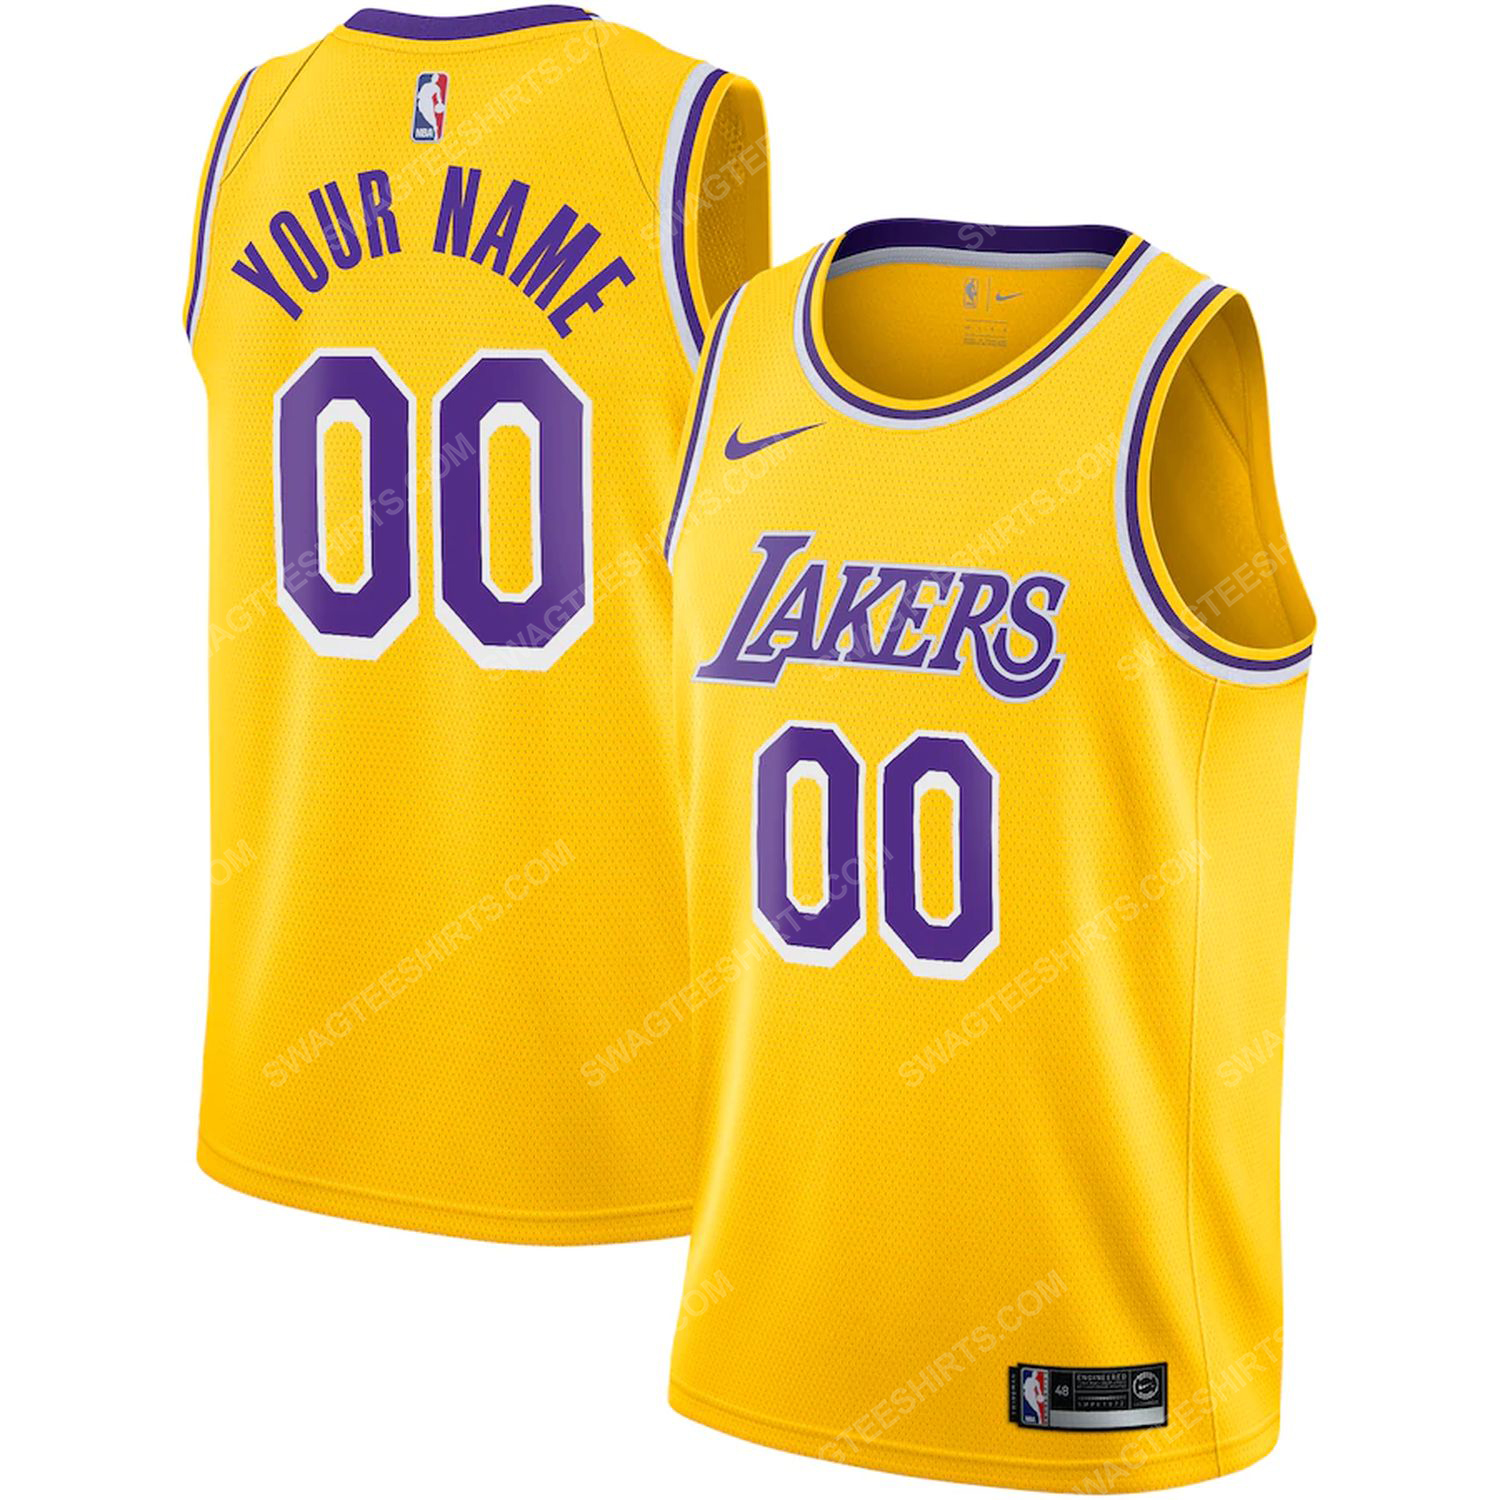 Custom nba los angeles lakers basketball jersey-icon edition- gold - Copy (3)